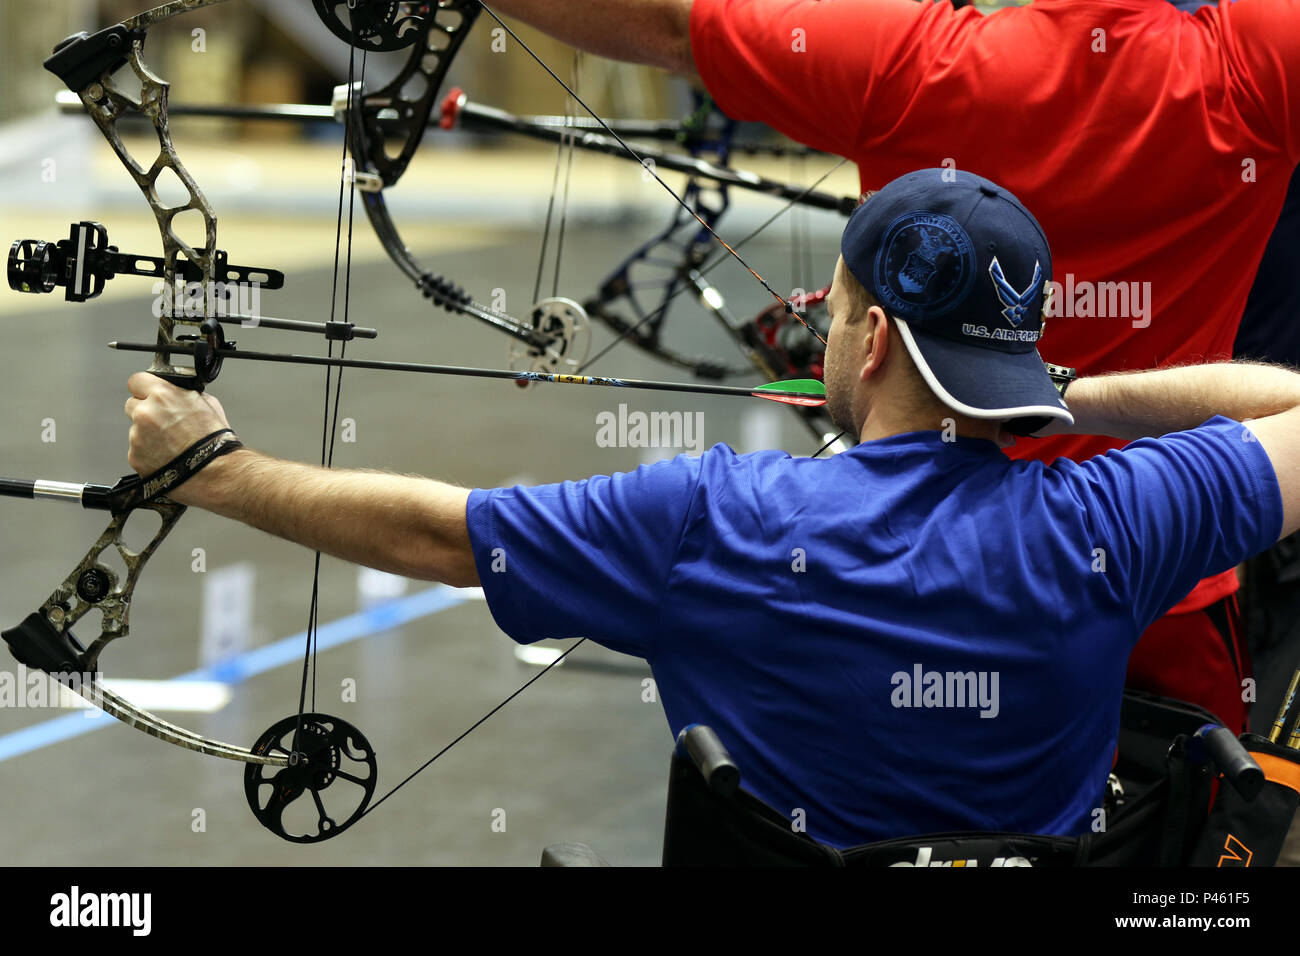 U.S. Air Force Veteran Brian Schaaf, an Oxford, England, native, aims his compound bow at his target during the archery competition at the 2016 DoD Warrior Games at the U.S. Military Academy at West Point, N.Y.  The Warrior Games is a Paralympic-style adaptive sports competition for wounded, ill and injured Service members and veterans. (U.S. Army photo by Sgt. Joshua Brownlee/Released) Stock Photo